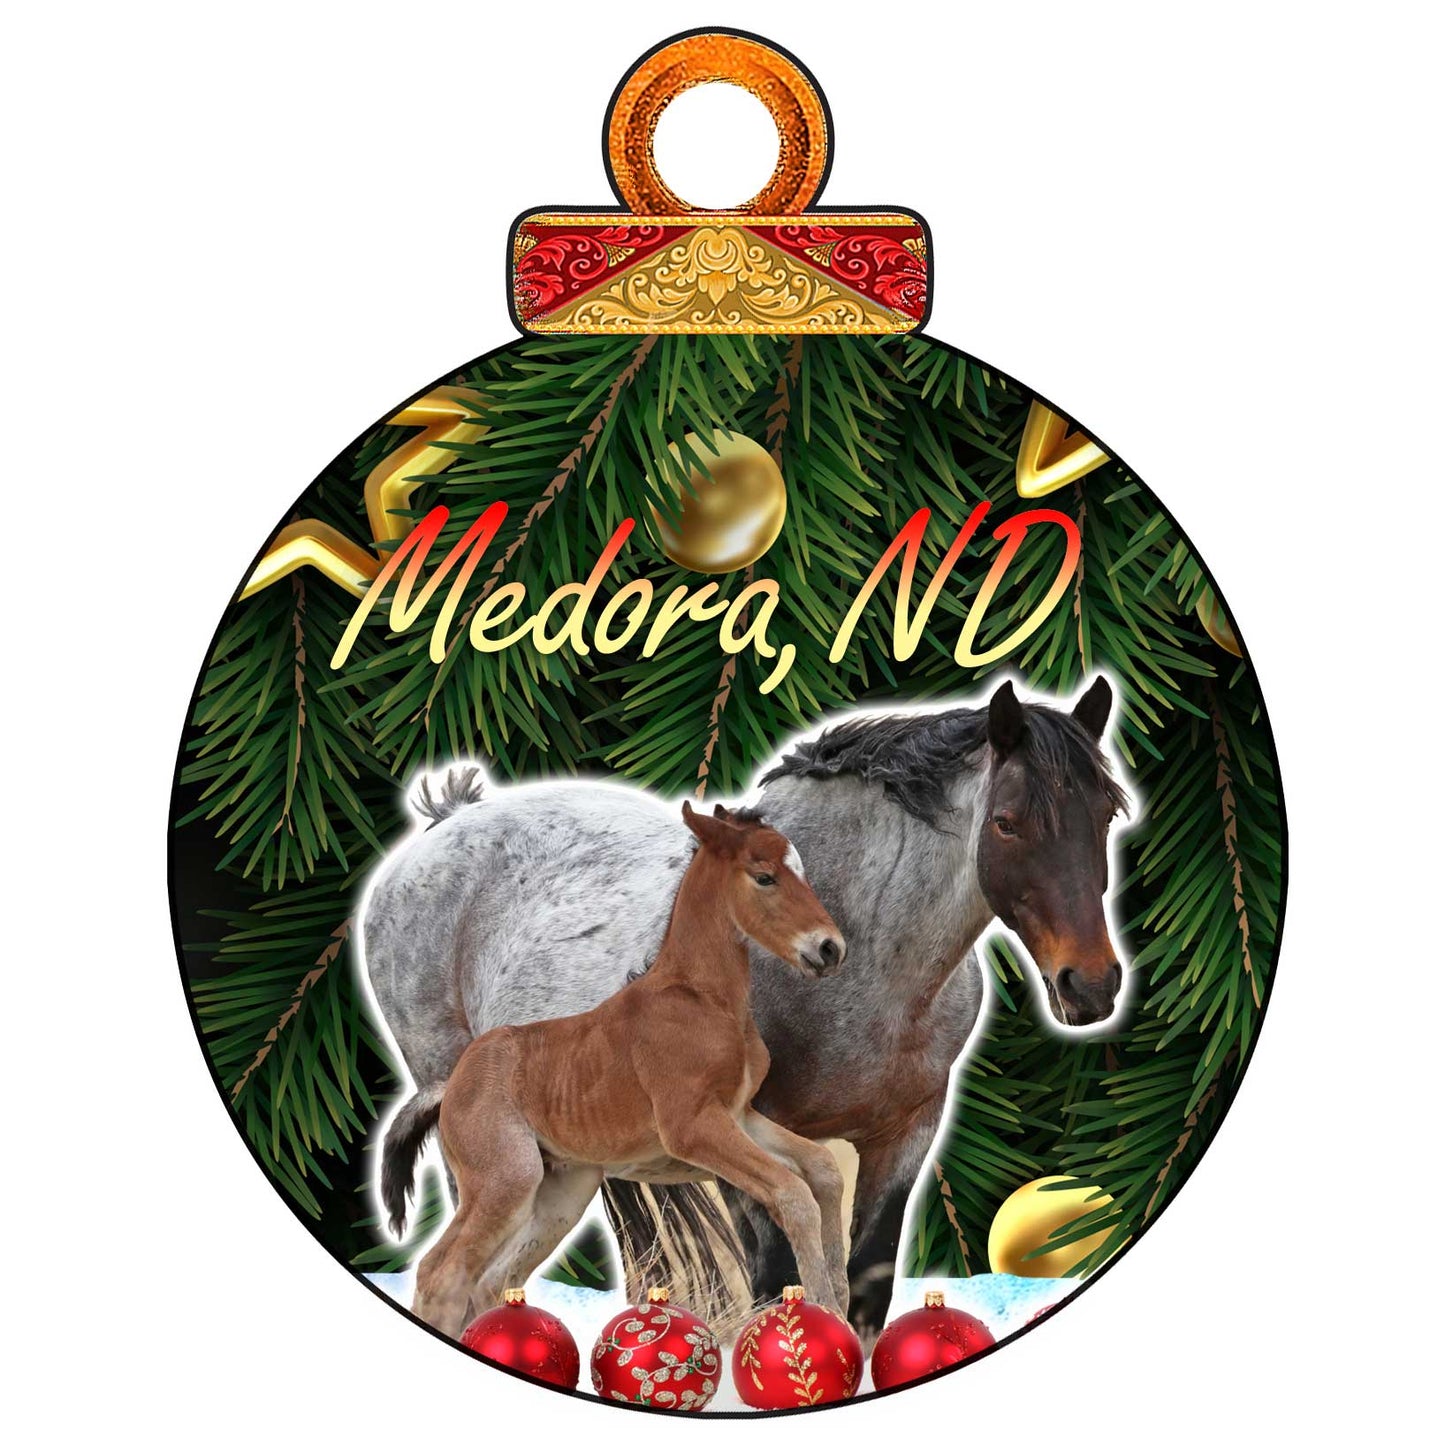 Chasing Horses 2021 Christmas card AND wooden ornament set